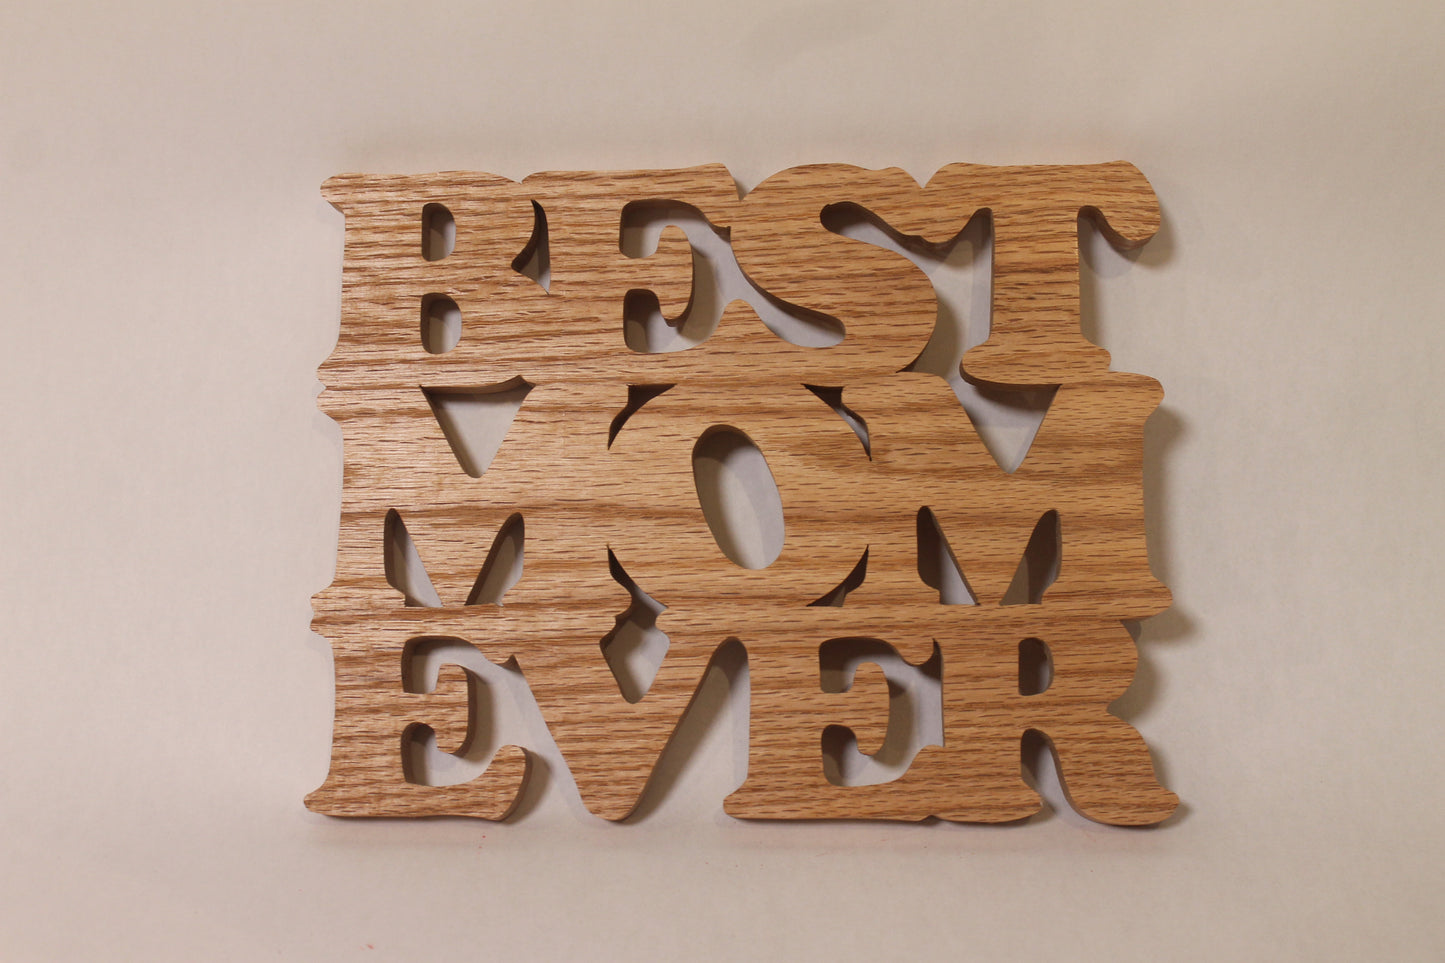 Best Mom Ever sign - great gift for your mom for any occasion